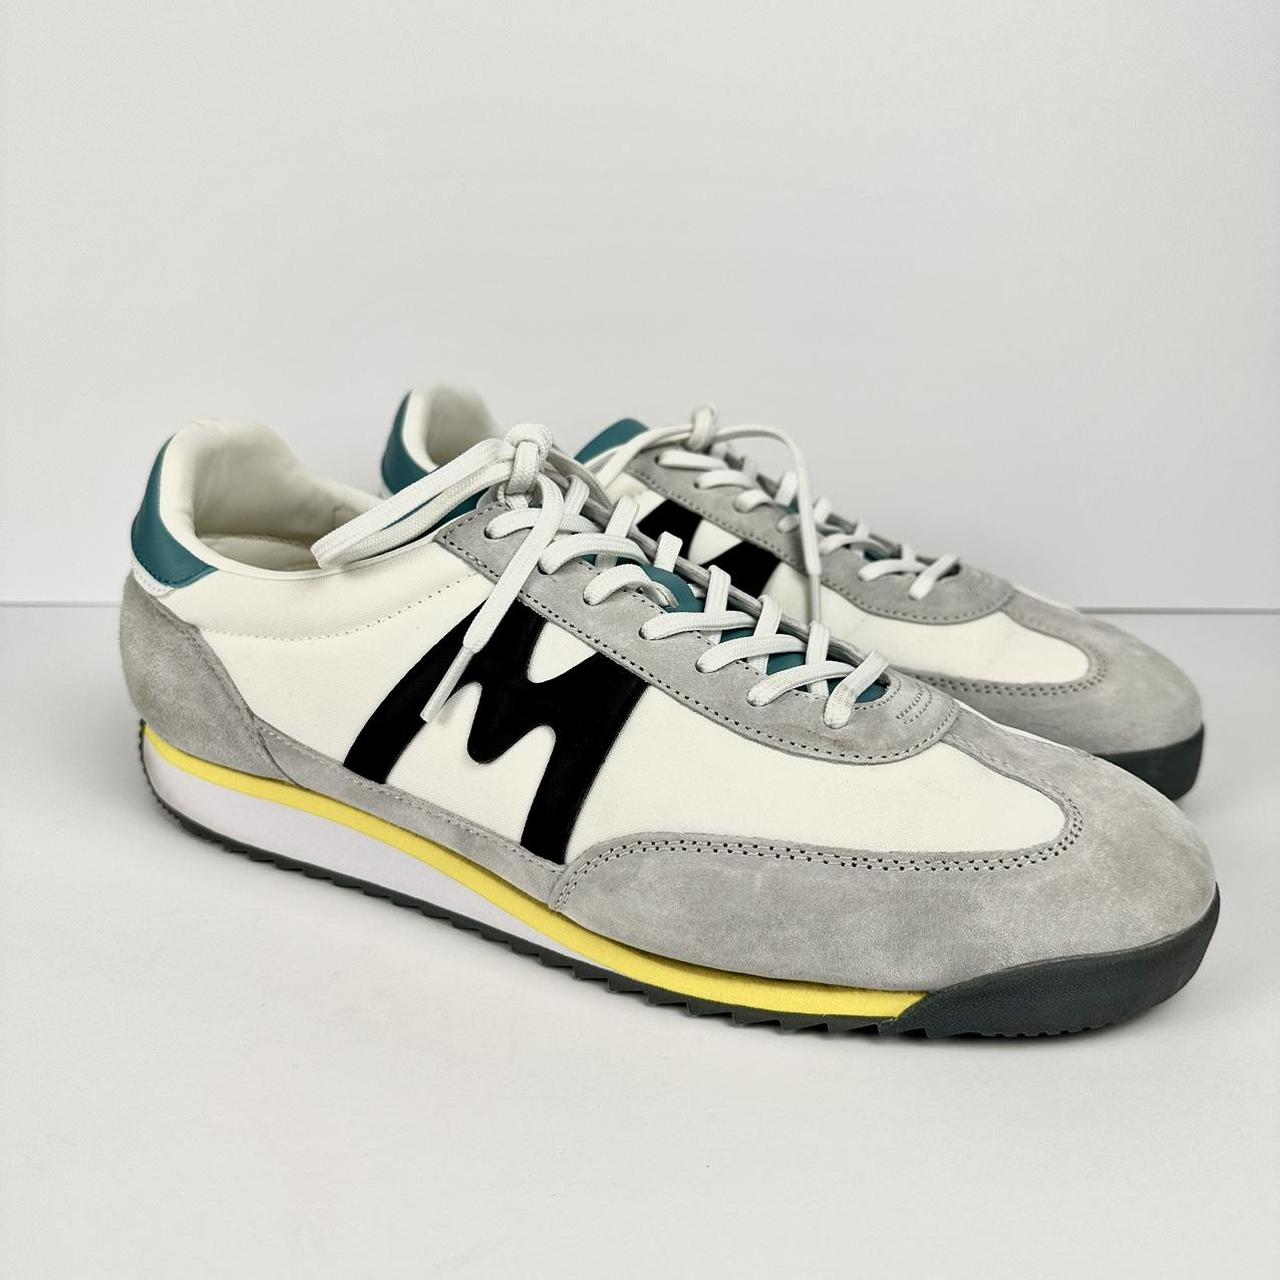 Karhu Men's White and Blue Trainers